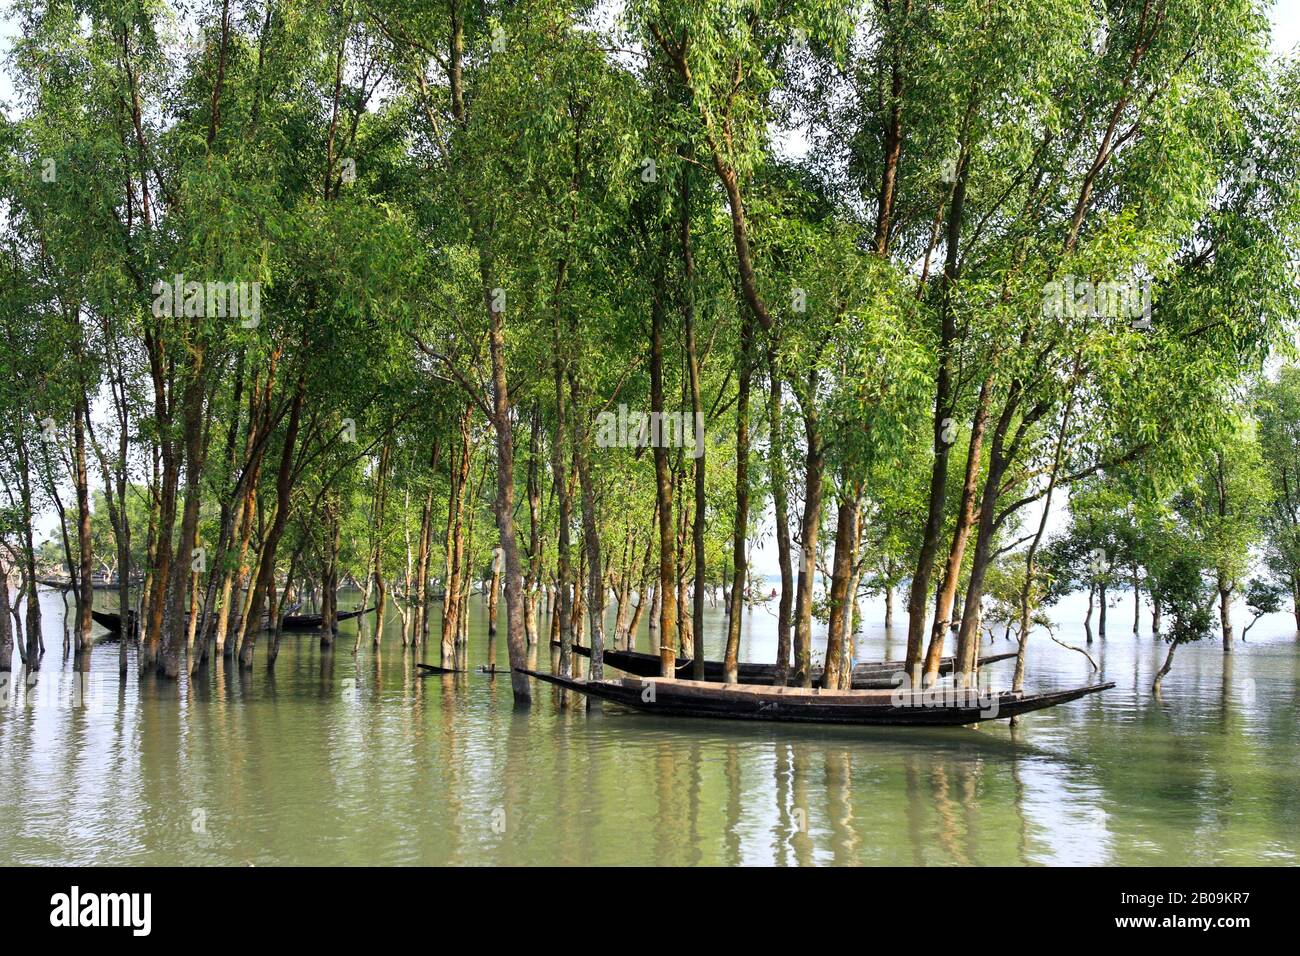 Fishing boats in Sundarban, the largest mangrove forest in the world. Bangladesh. November 2008. Stock Photo